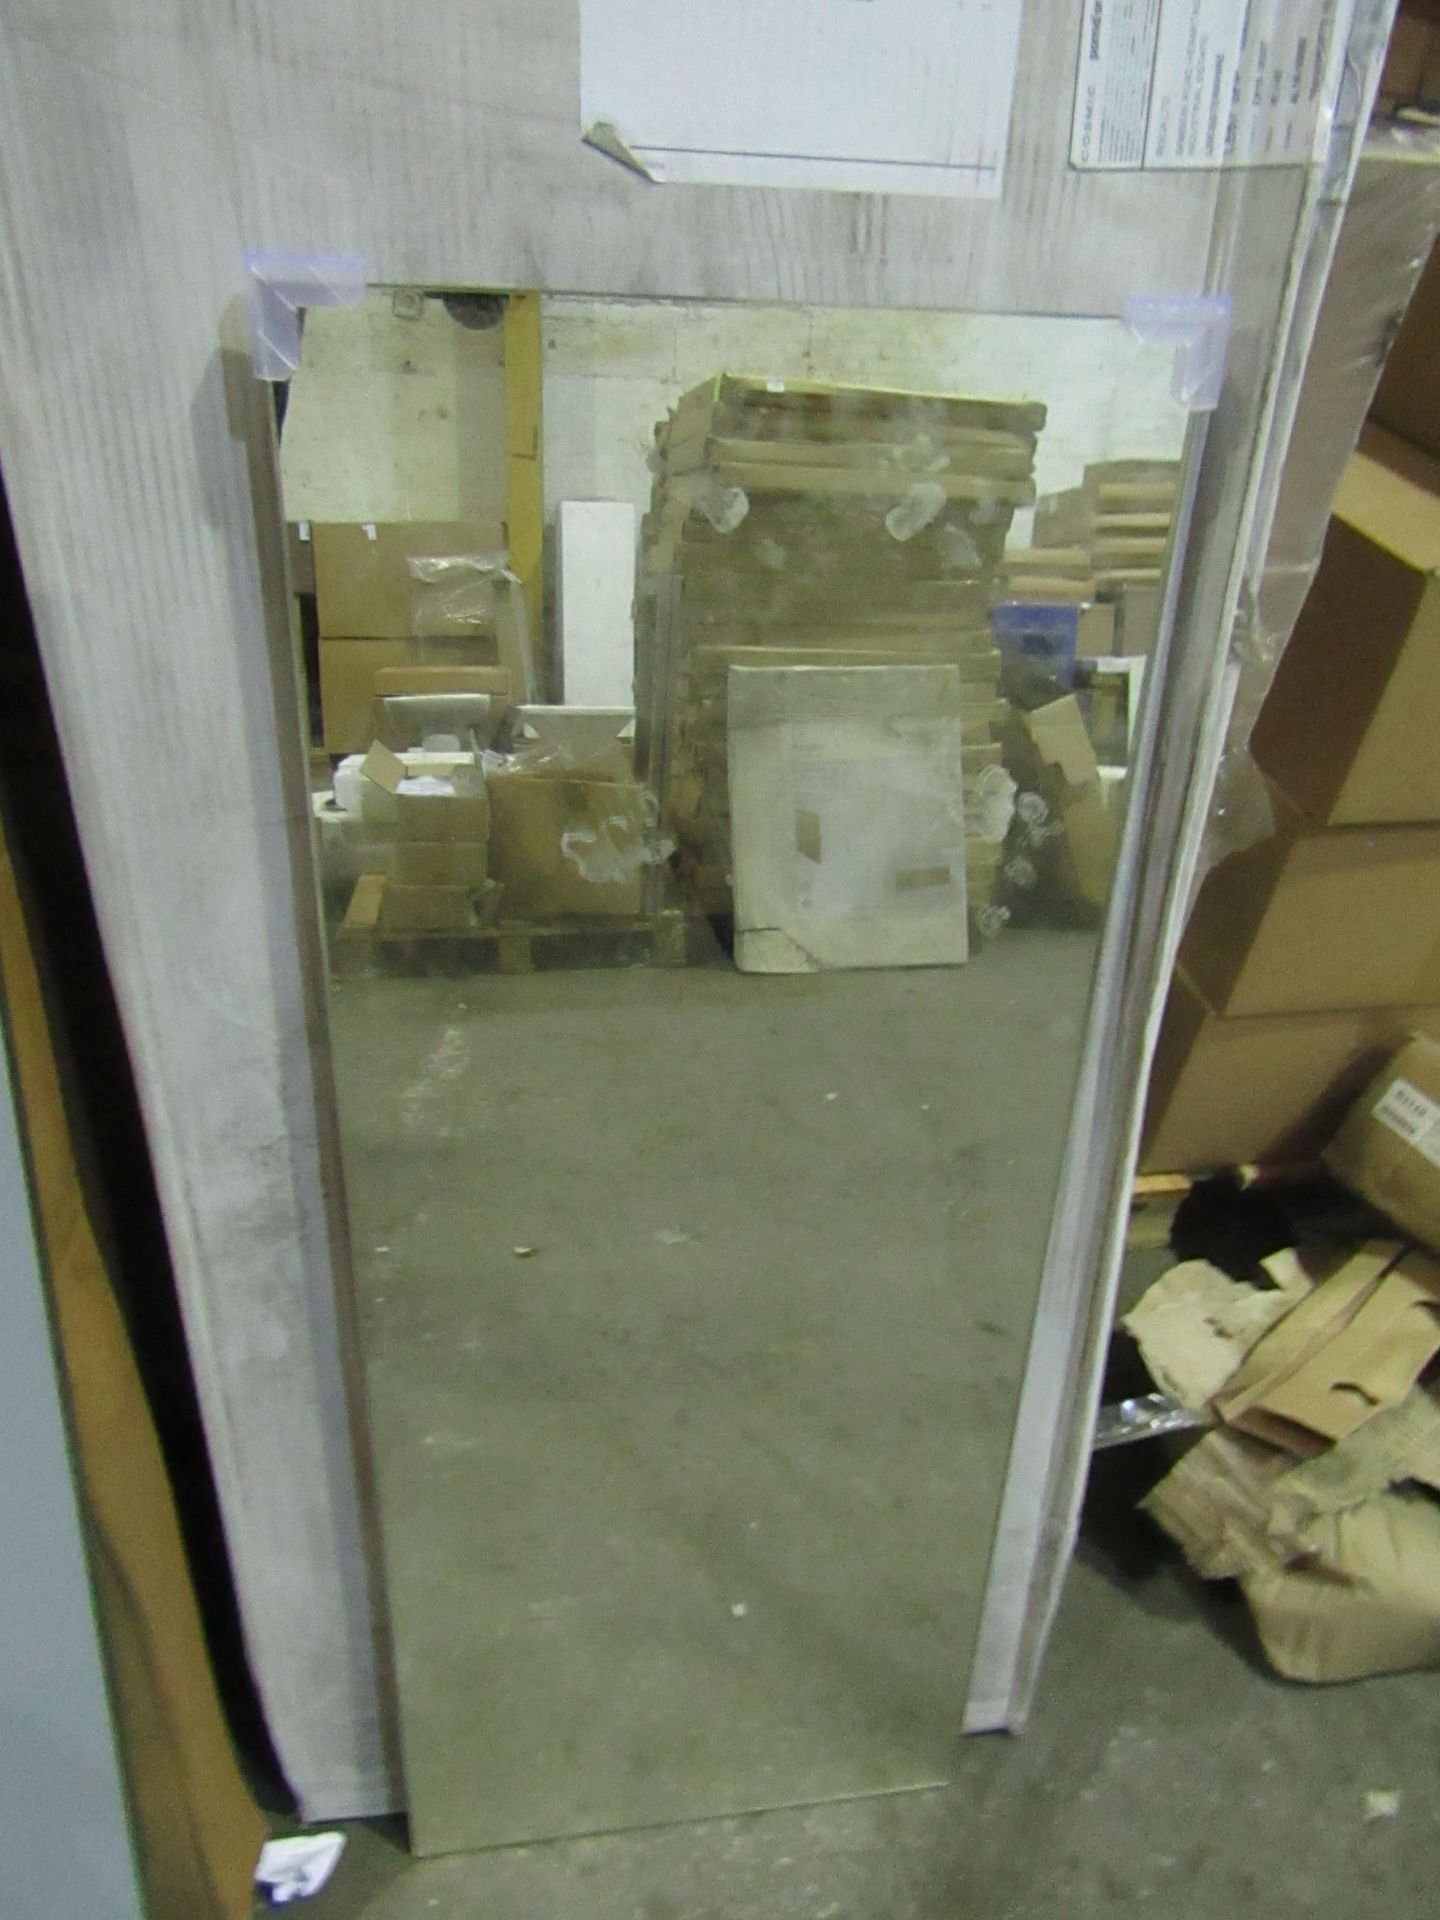 2x Cosmic - Wall-Mounted Mirror - 40x100cm - Slightly Chip On One Corner - Unused & Boxed.